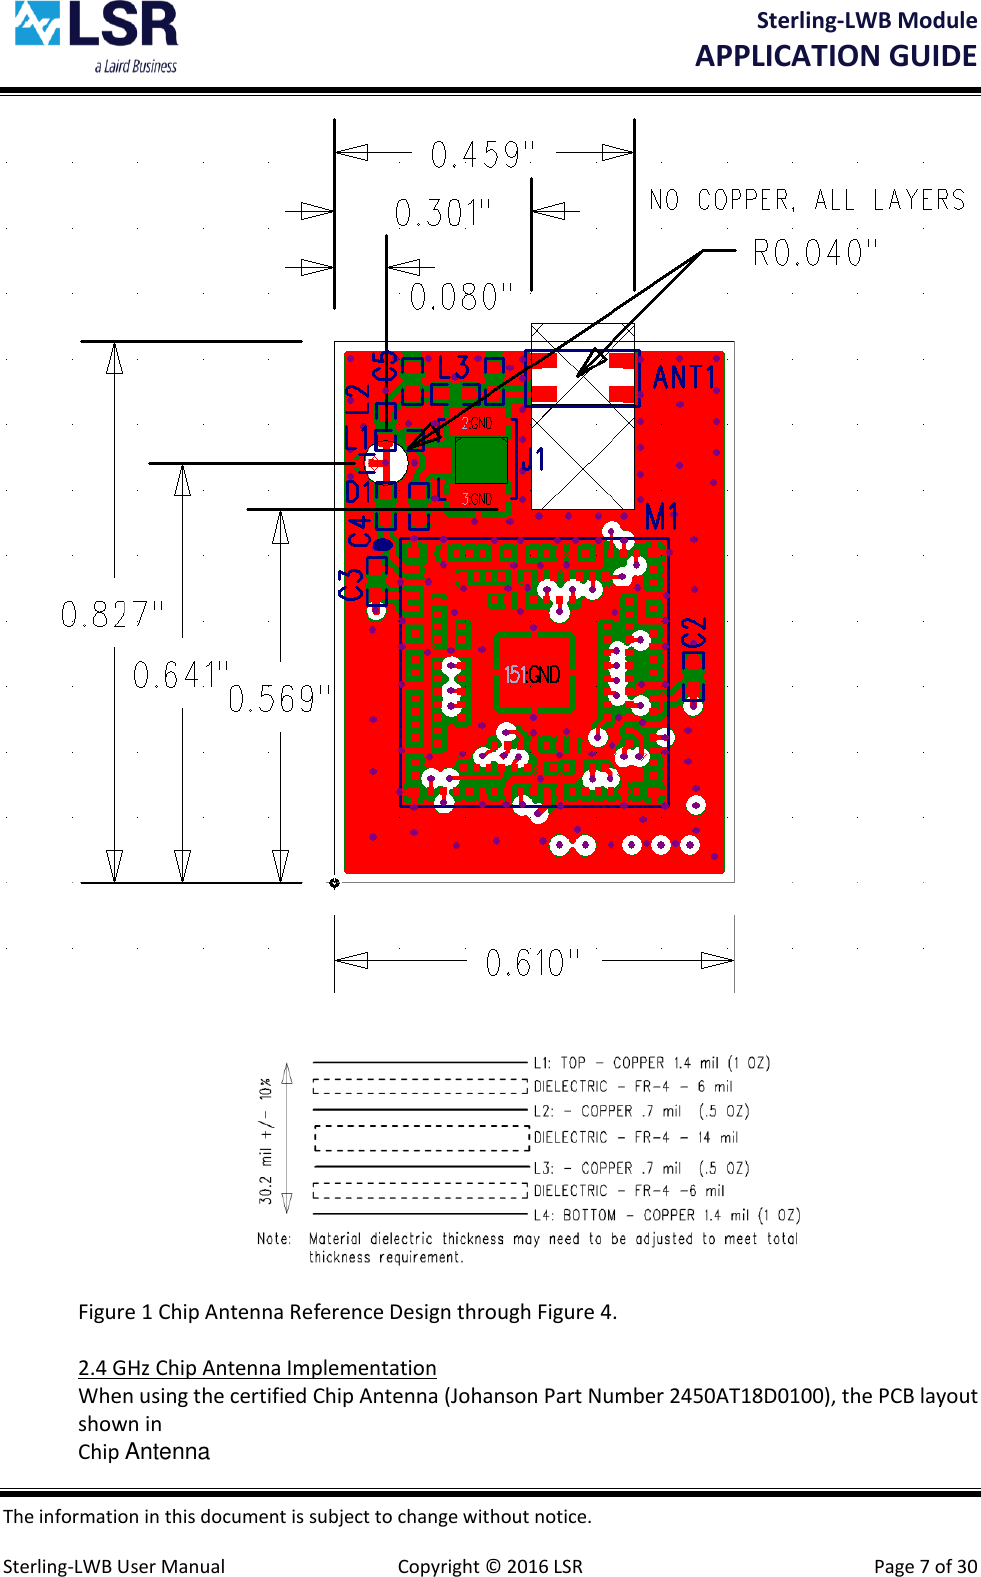 Sterling-LWB Module       APPLICATION GUIDE  The information in this document is subject to change without notice.  Sterling-LWB User Manual  Copyright © 2016 LSR  Page 7 of 30   Figure 1 Chip Antenna Reference Design through Figure 4.  2.4 GHz Chip Antenna Implementation When using the certified Chip Antenna (Johanson Part Number 2450AT18D0100), the PCB layout shown in  Chip Antenna 